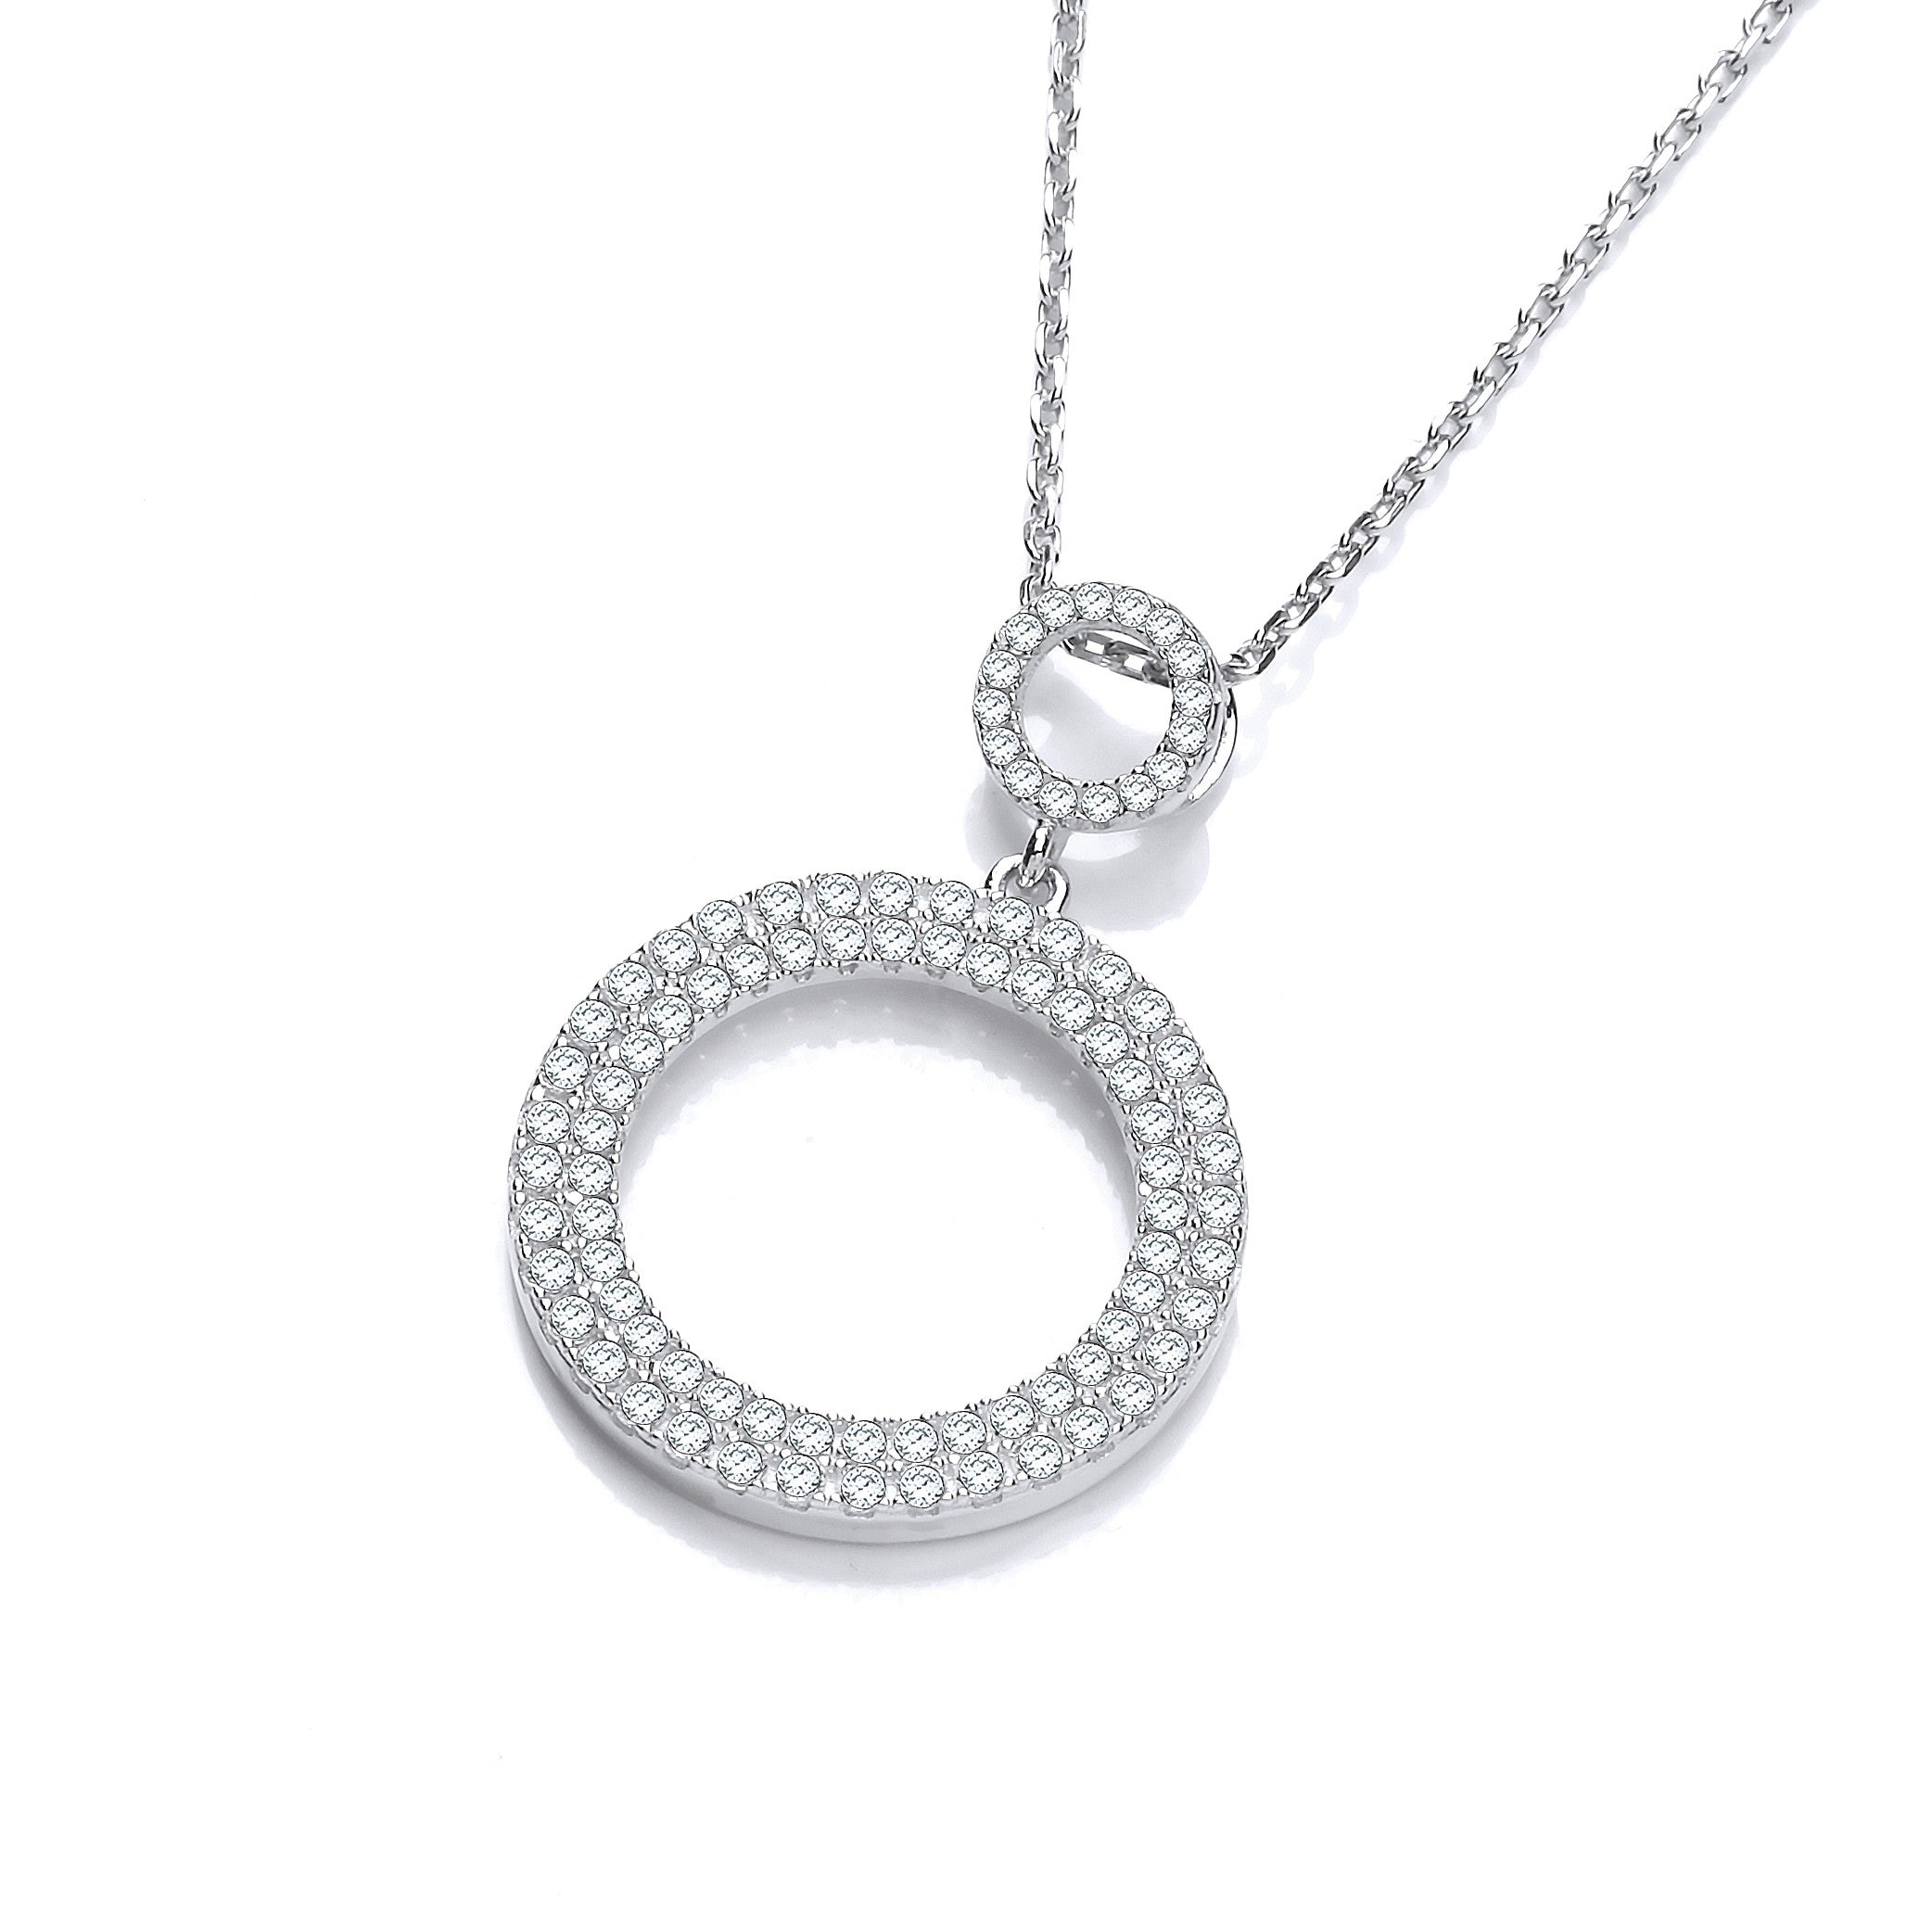 Circle of Life Pave' set Cubic Zirconia Pendant with 18" Chain